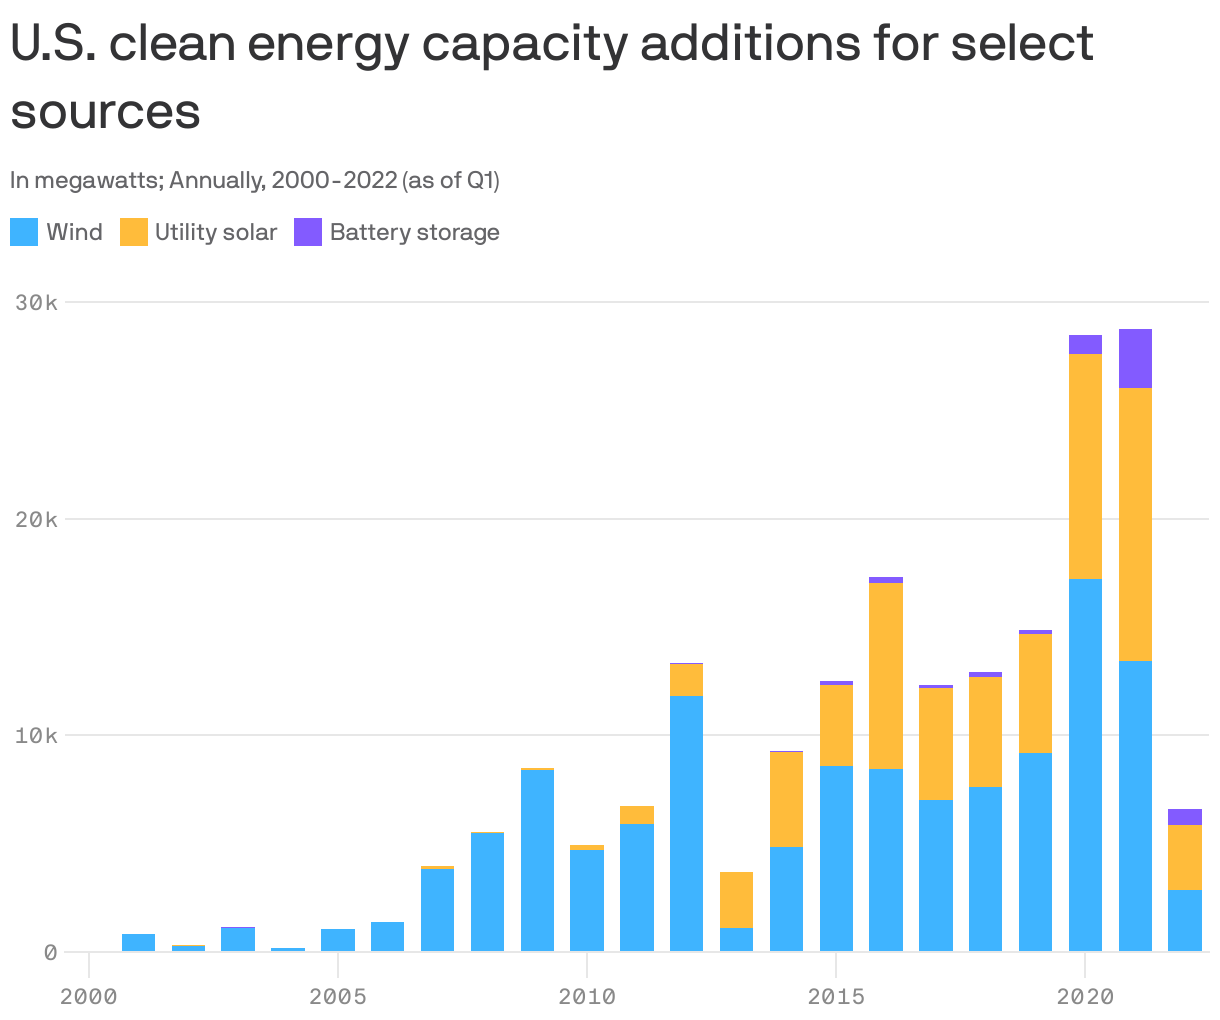 U.S. clean energy capacity additions for select sources